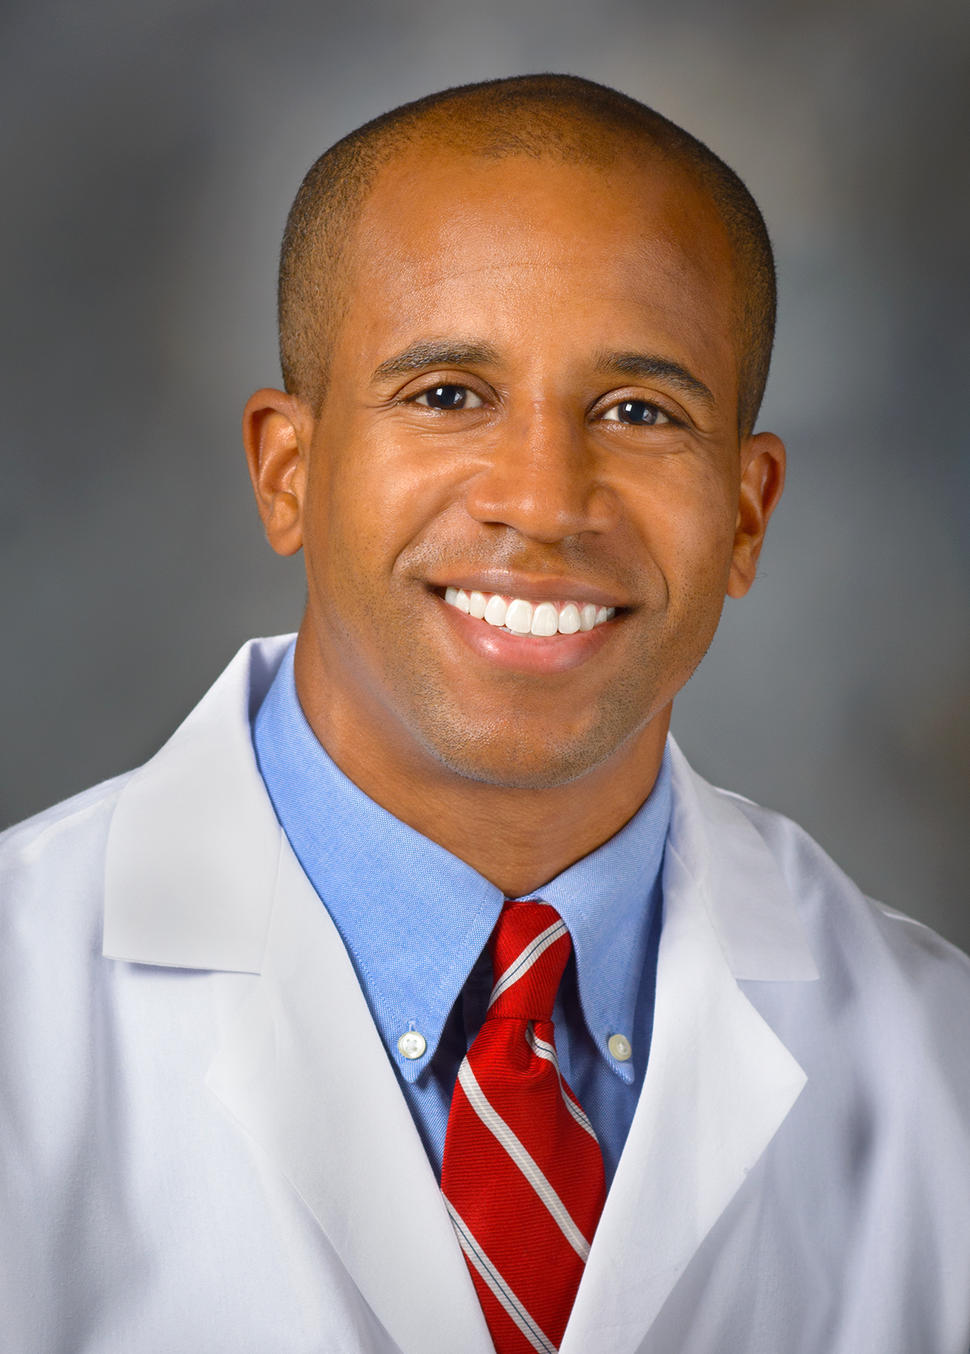 Neurosurgeon Shares Tips to Help Patients Specialized - NCI